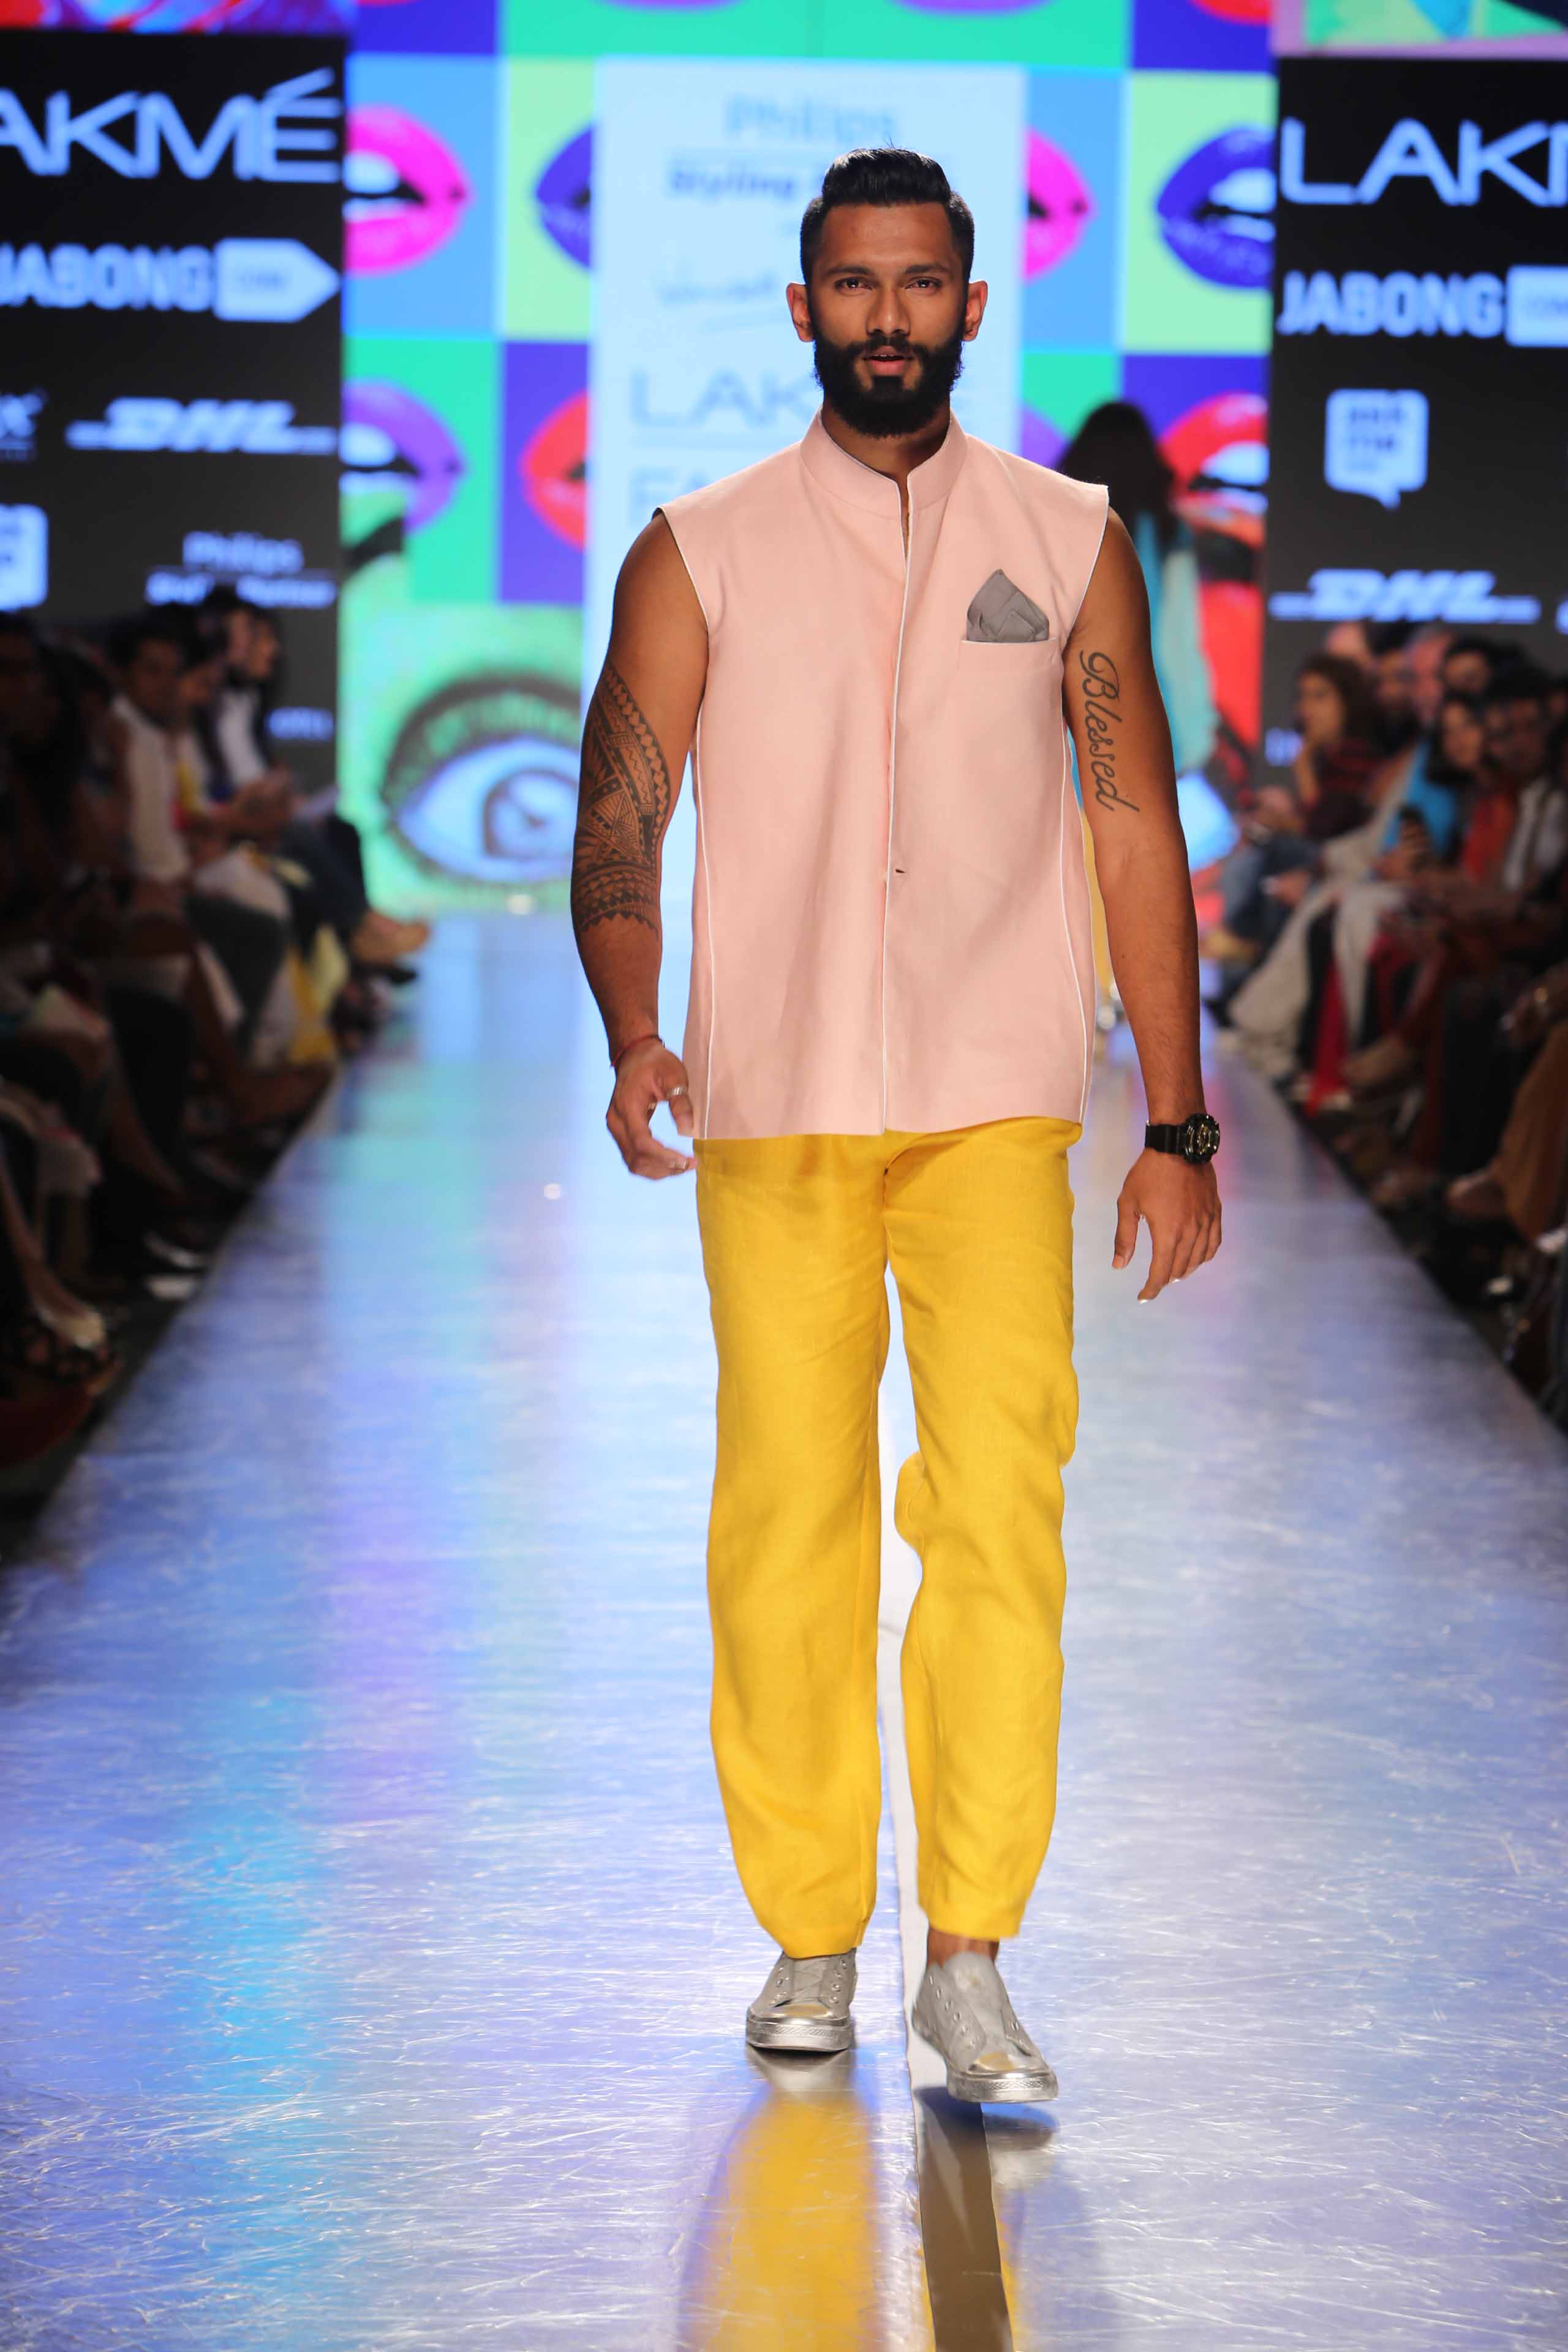 Wendell Rodricks presented Popology for Philips 2015'at Lakme Fashion Week